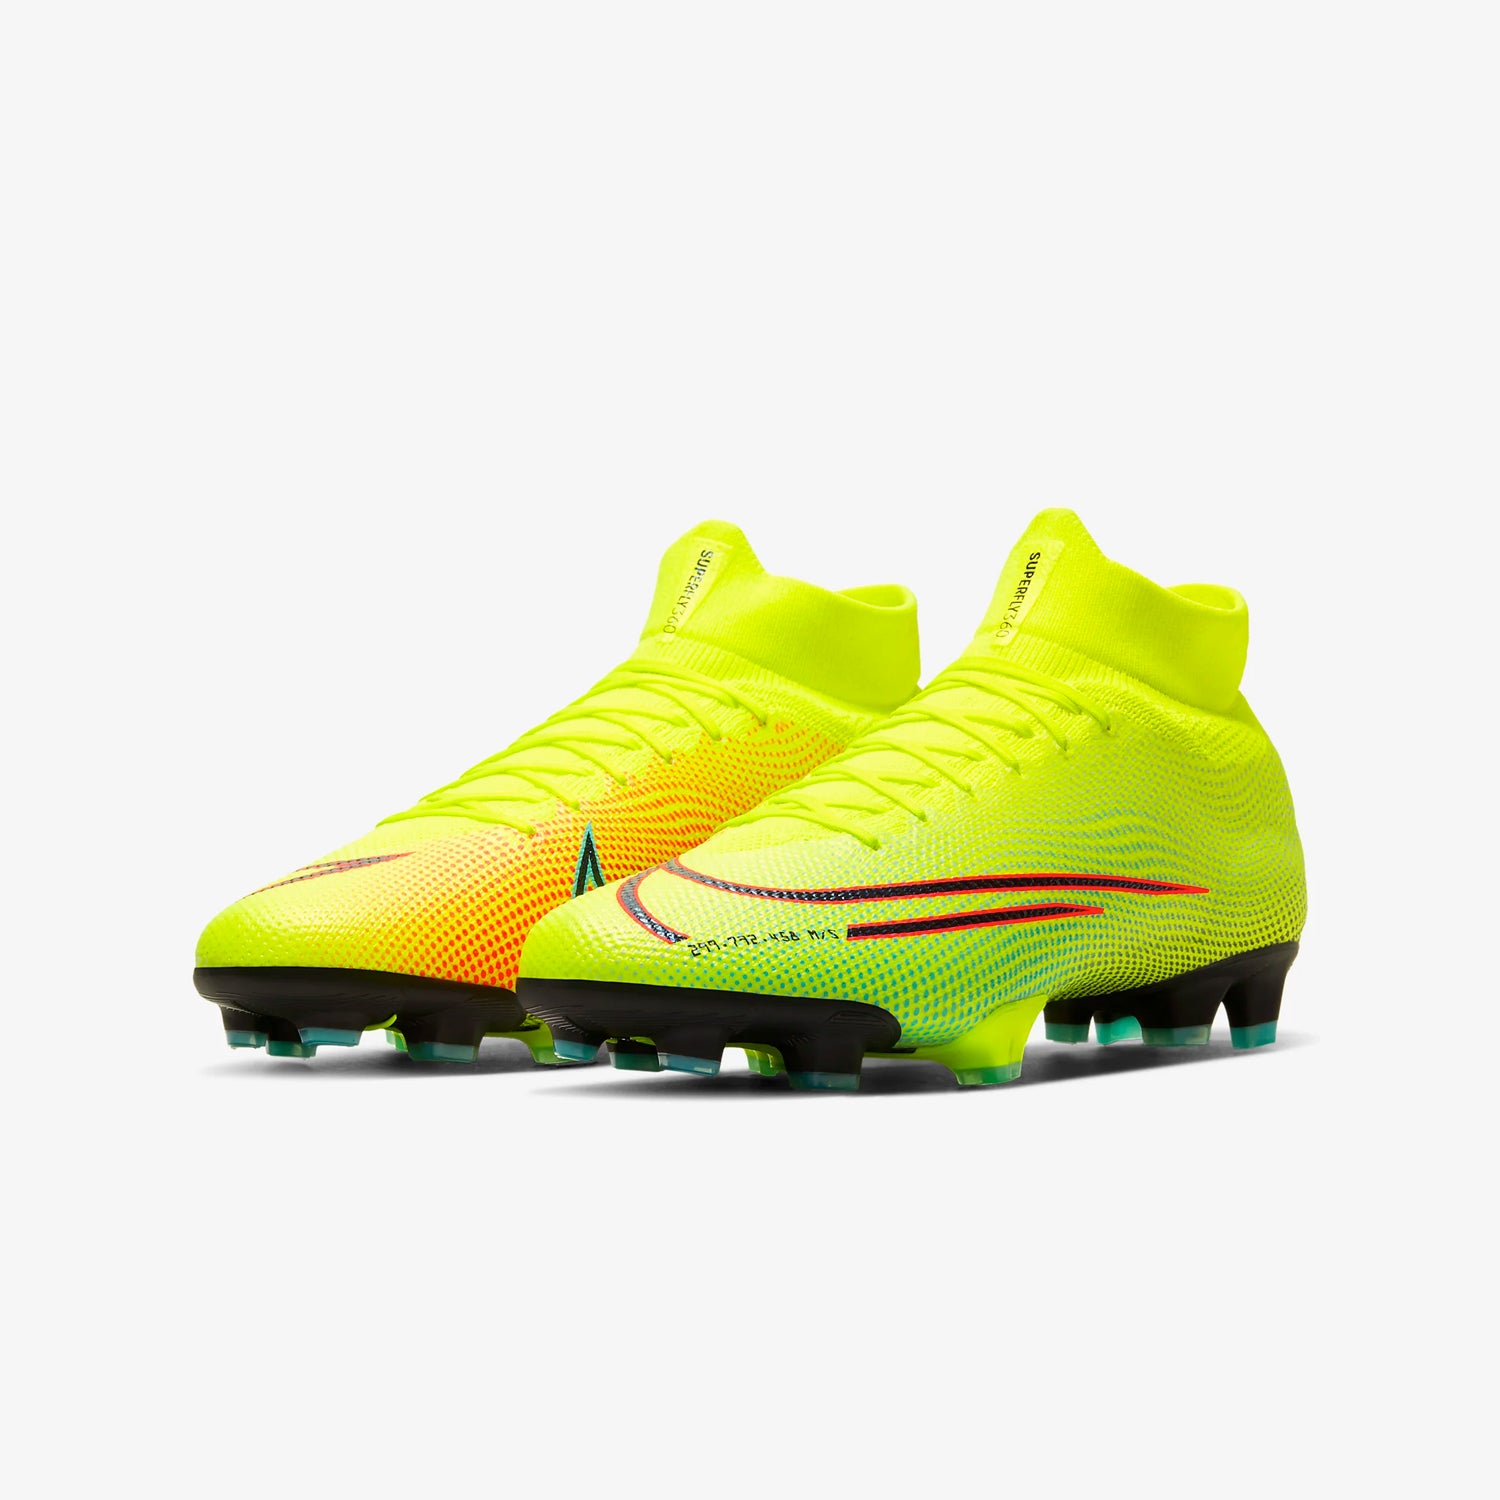 Men's Mercurial Superfly 7 Pro MDS Firm-Ground Soccer Cleat